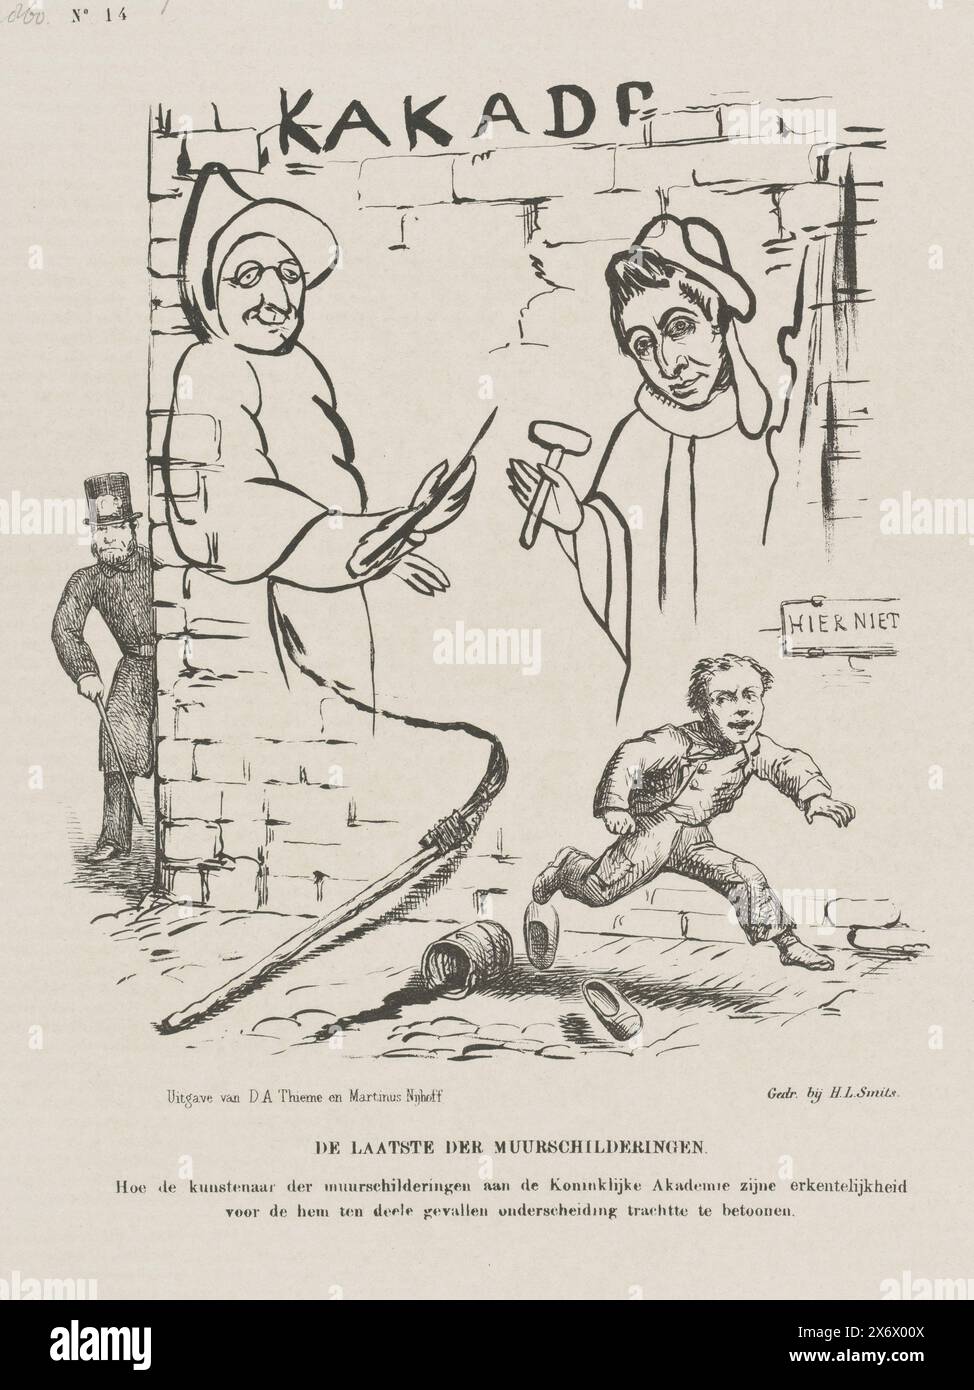 Cartoon on the board of the Royal Academy of Sciences, 1860, The last of the Murals (title on object), Cartoon in which a dyer boy paints caricatures of J. de Wal and H.J. on a wall. Koenen, board members of the Royal (Dutch) Academy of Sciences. A police officer comes around the corner on the left. Plate published in the weekly magazine De Nederlandsche Spectator, no. 14, April 7, 1860., print, print maker: Johan Michaël Schmidt Crans, after design by: Reinier Cornelis Bakhuizen van den Brink, printer: H.L. Smits, (mentioned on object), print maker: Netherlands, after design by: Netherlands Stock Photo